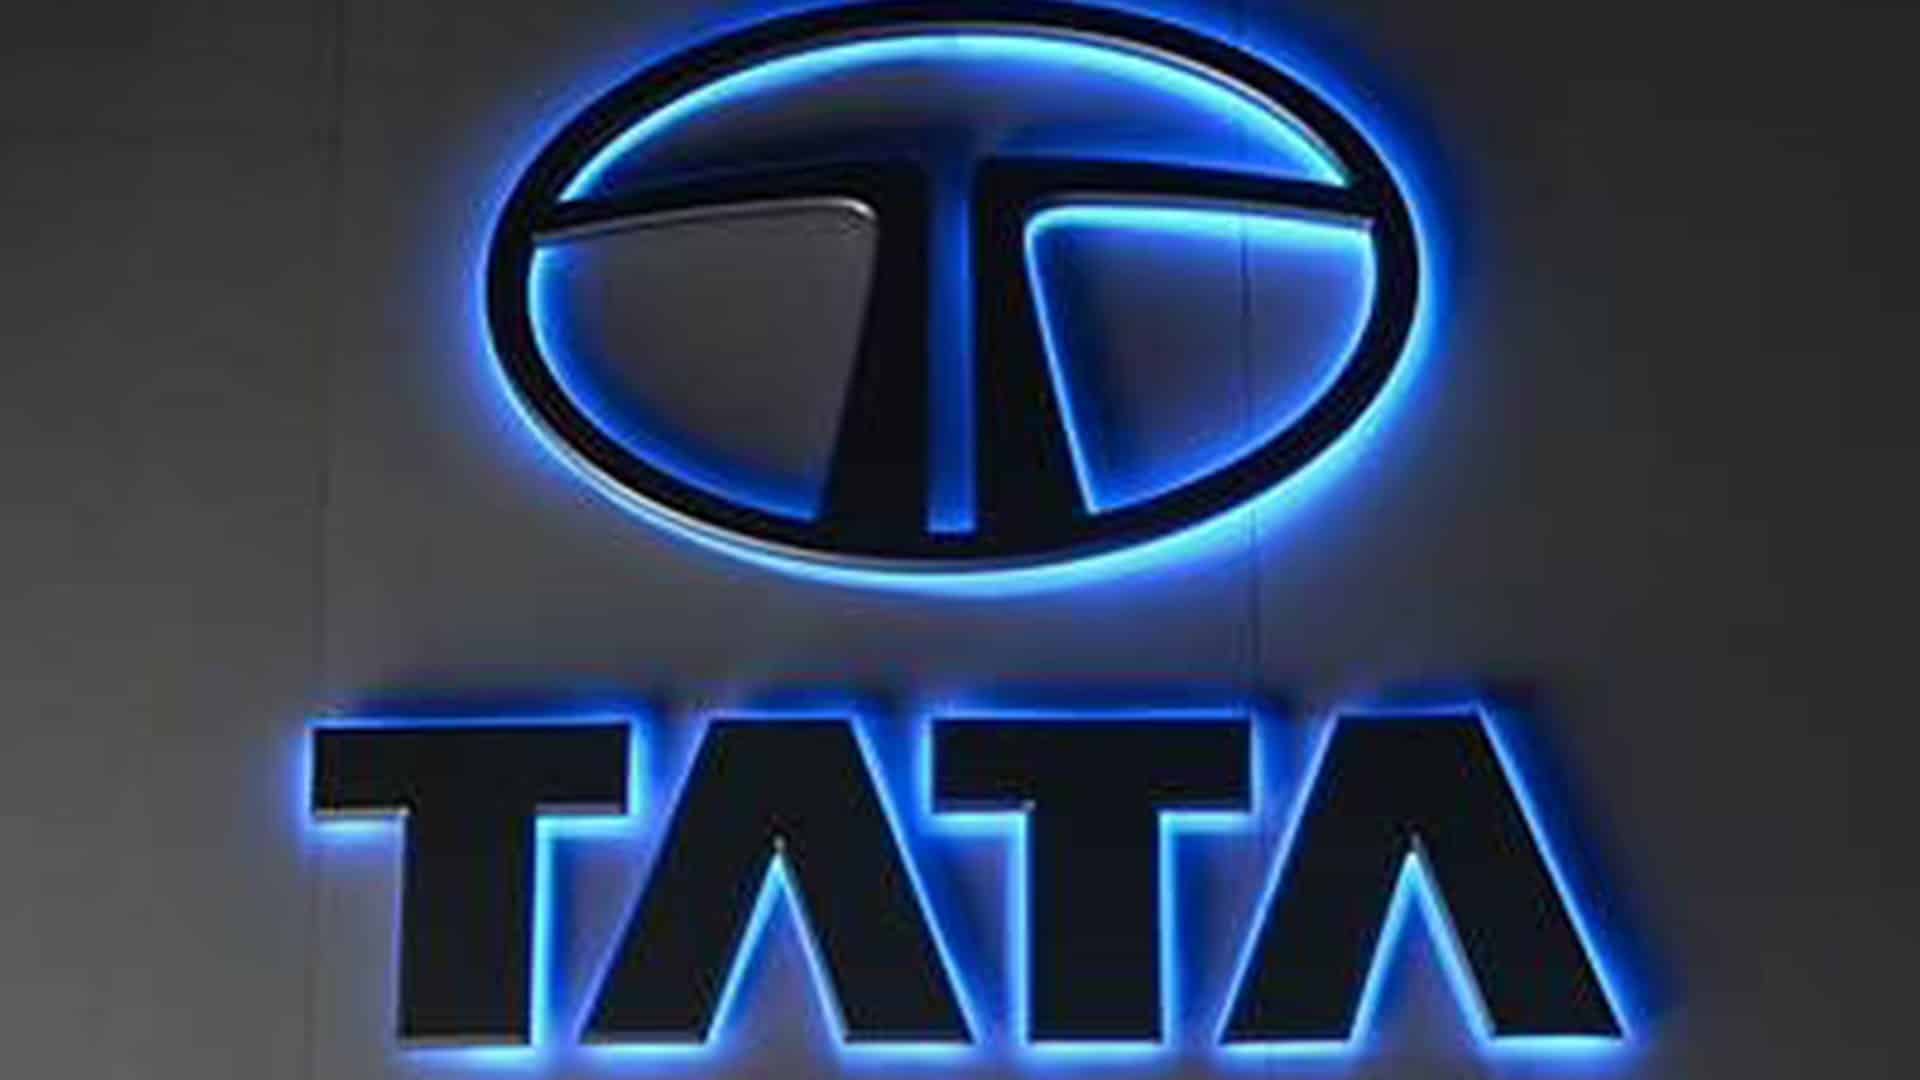 Tata Motors expects govt to be consistent with support for local production of EVs